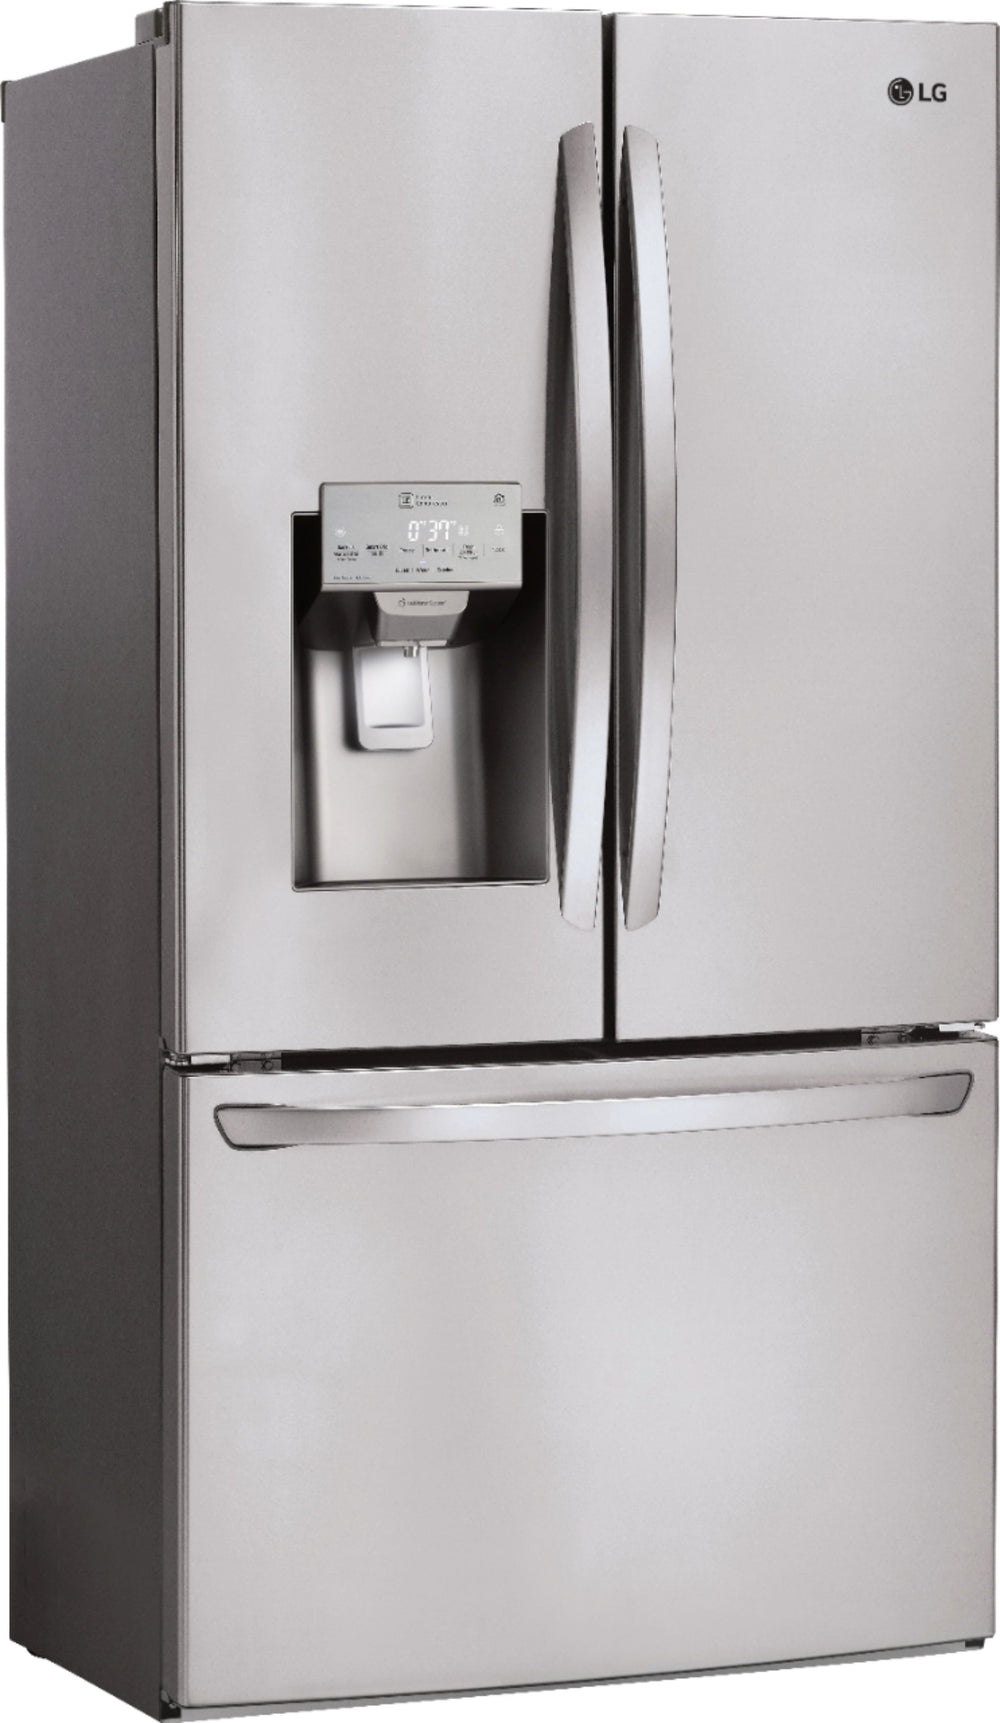 LG - 26.2 Cu. Ft. French Door Smart Refrigerator with Dual Ice Maker - Stainless steel_1